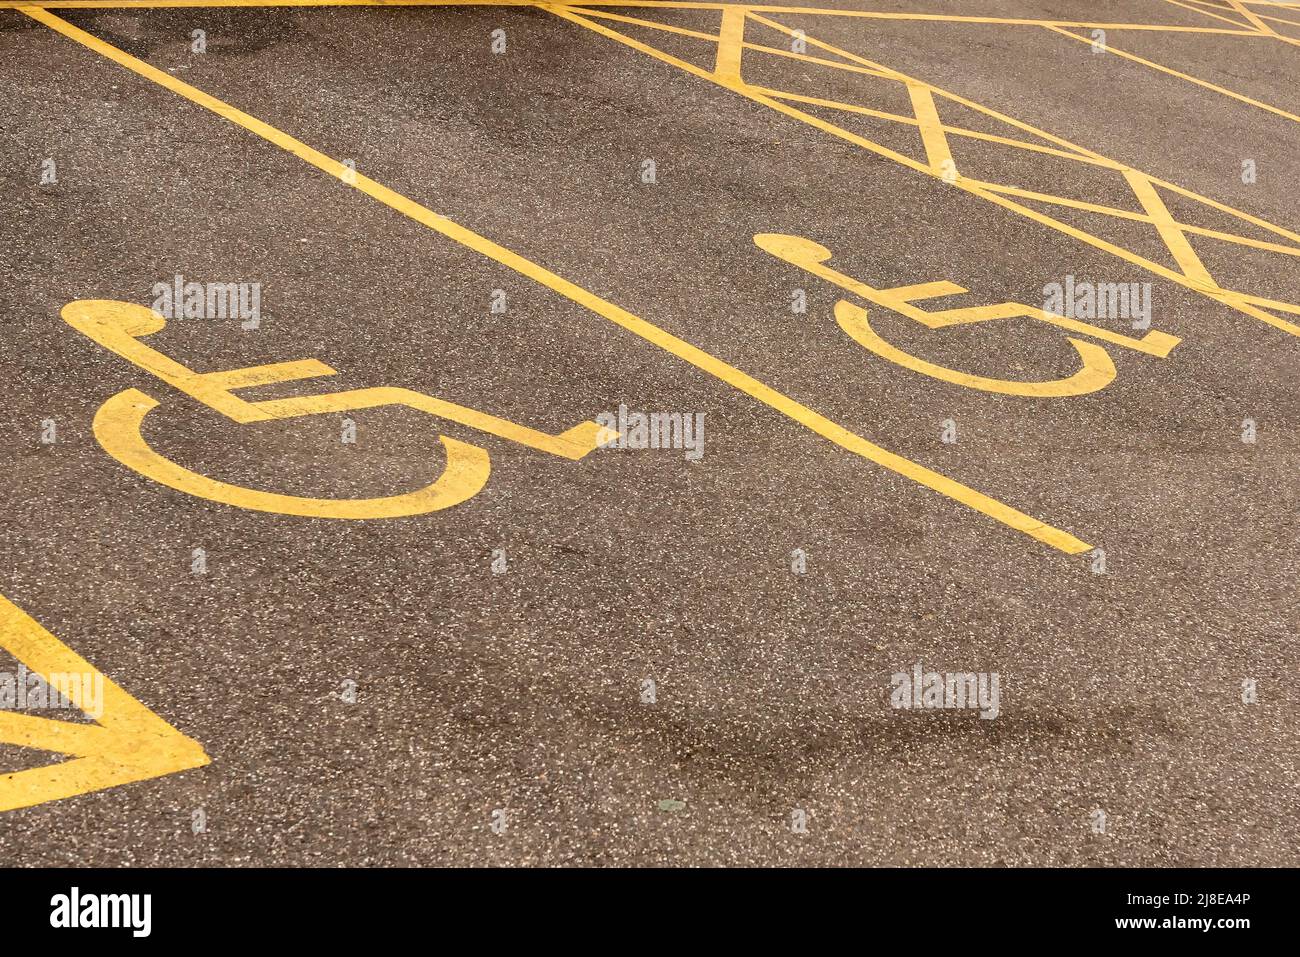 Disabled parking spaces Stock Photo